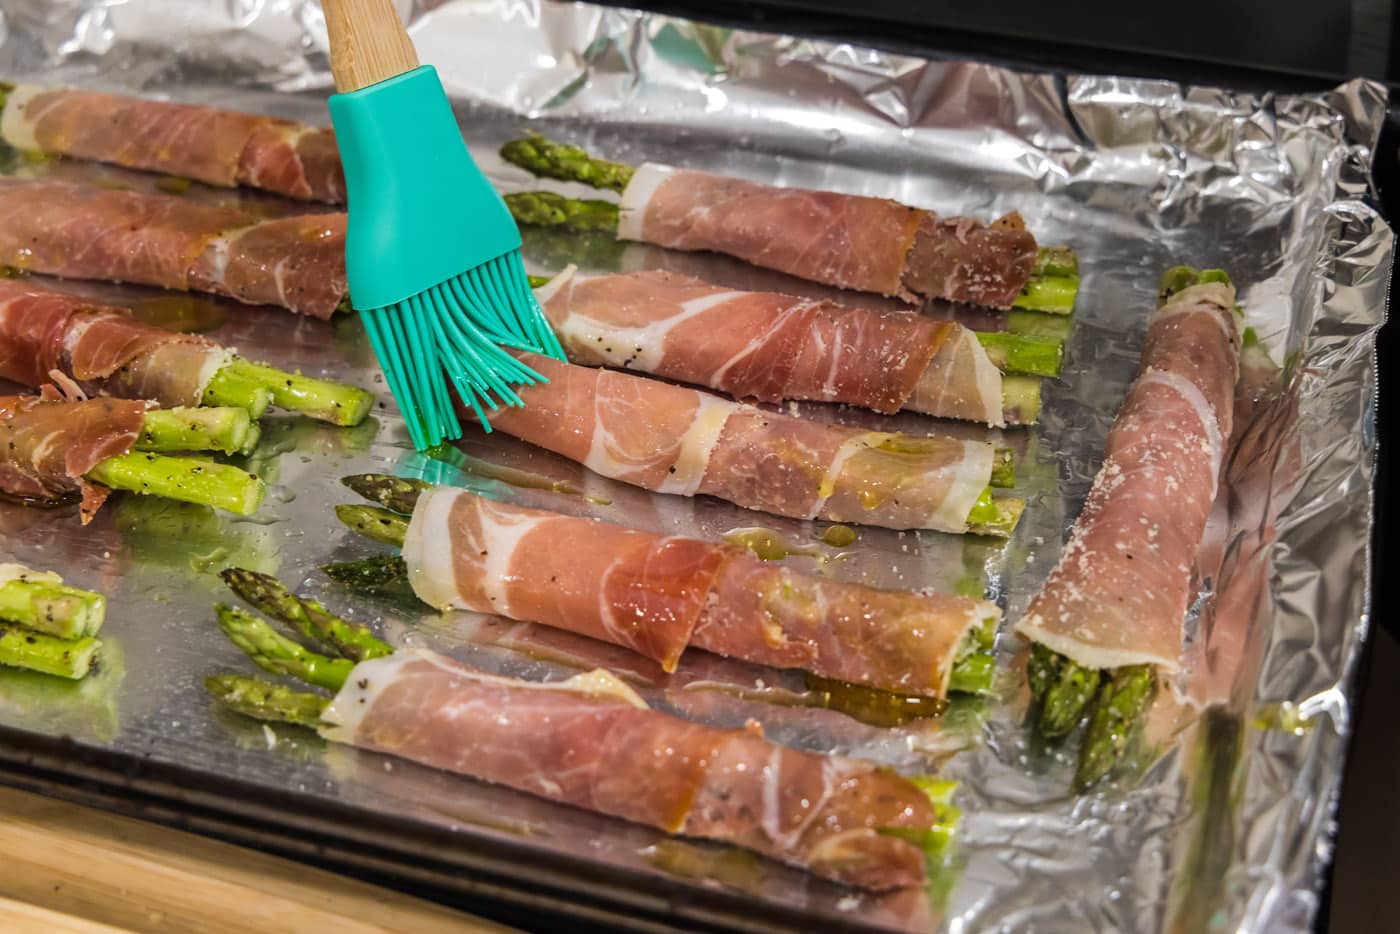 basting prosciutto asparagus with olive oil mixture